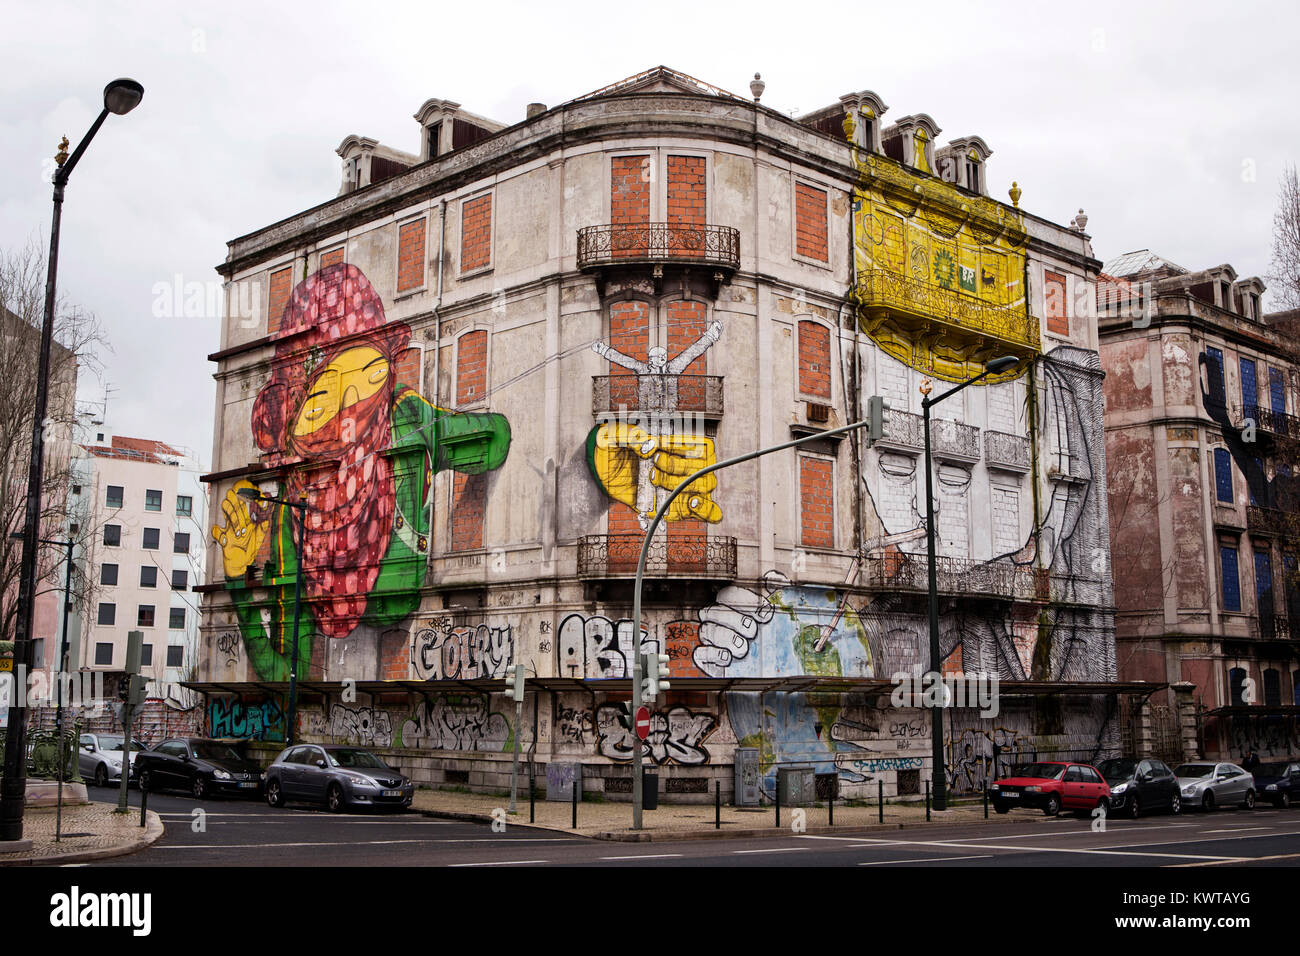 Corner building at Av Fontes Pereira de Melo has been painted by the street artist Gêmeos (to the left) and BLU, They created some amazing figures that draws the attention to the neglected buildings. Portugal 2013. Stock Photo